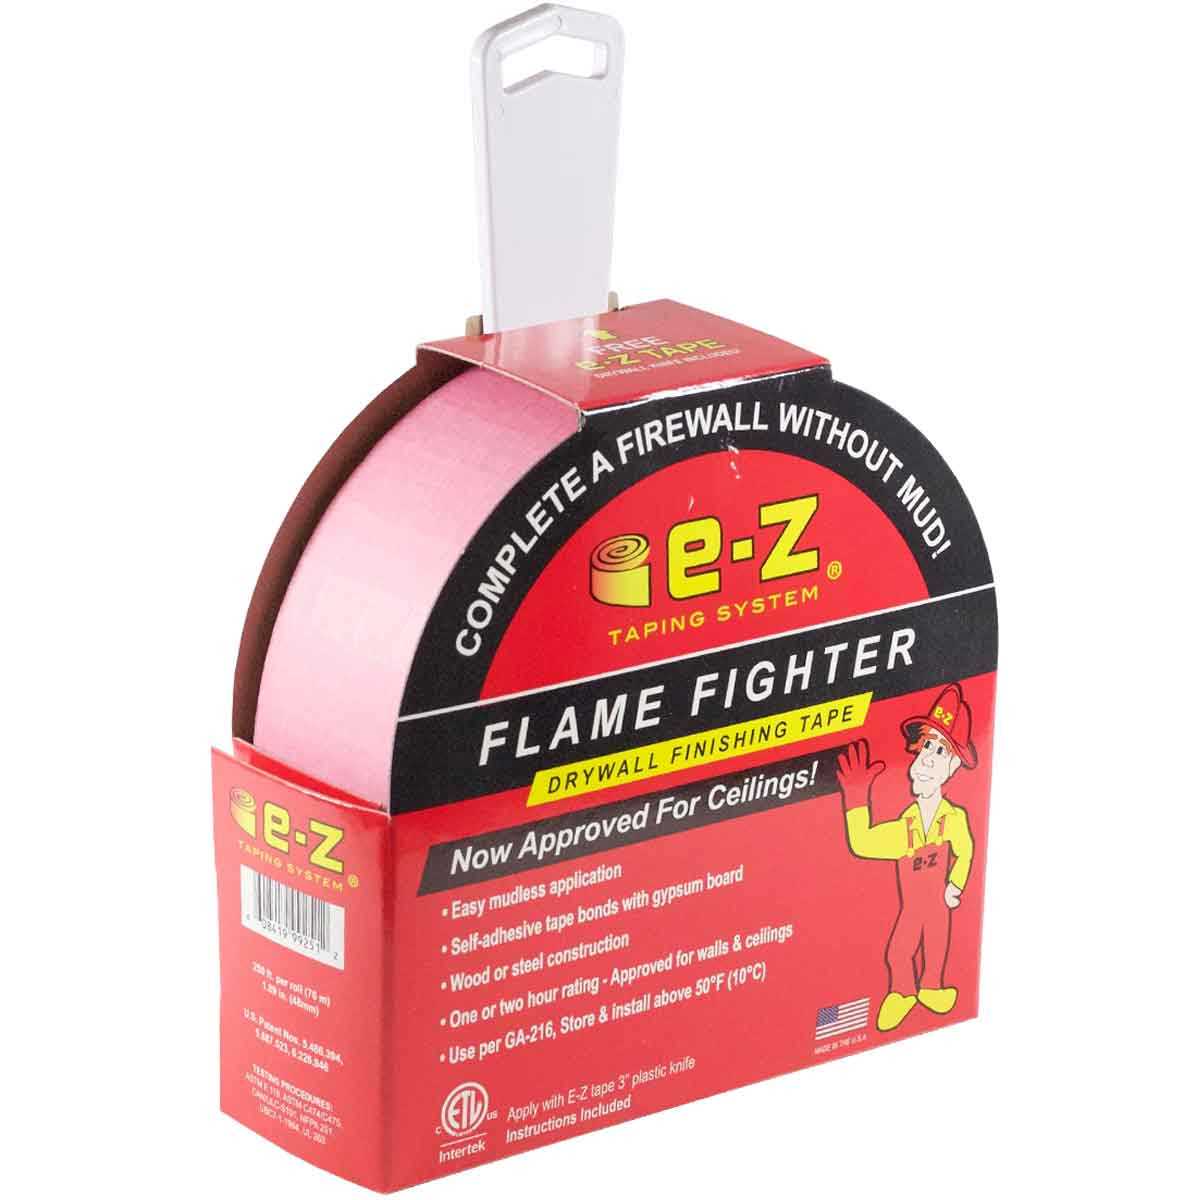 E-Z Tape Flame Fighter Drywall Fire Rated Joint Tape 250' Roll